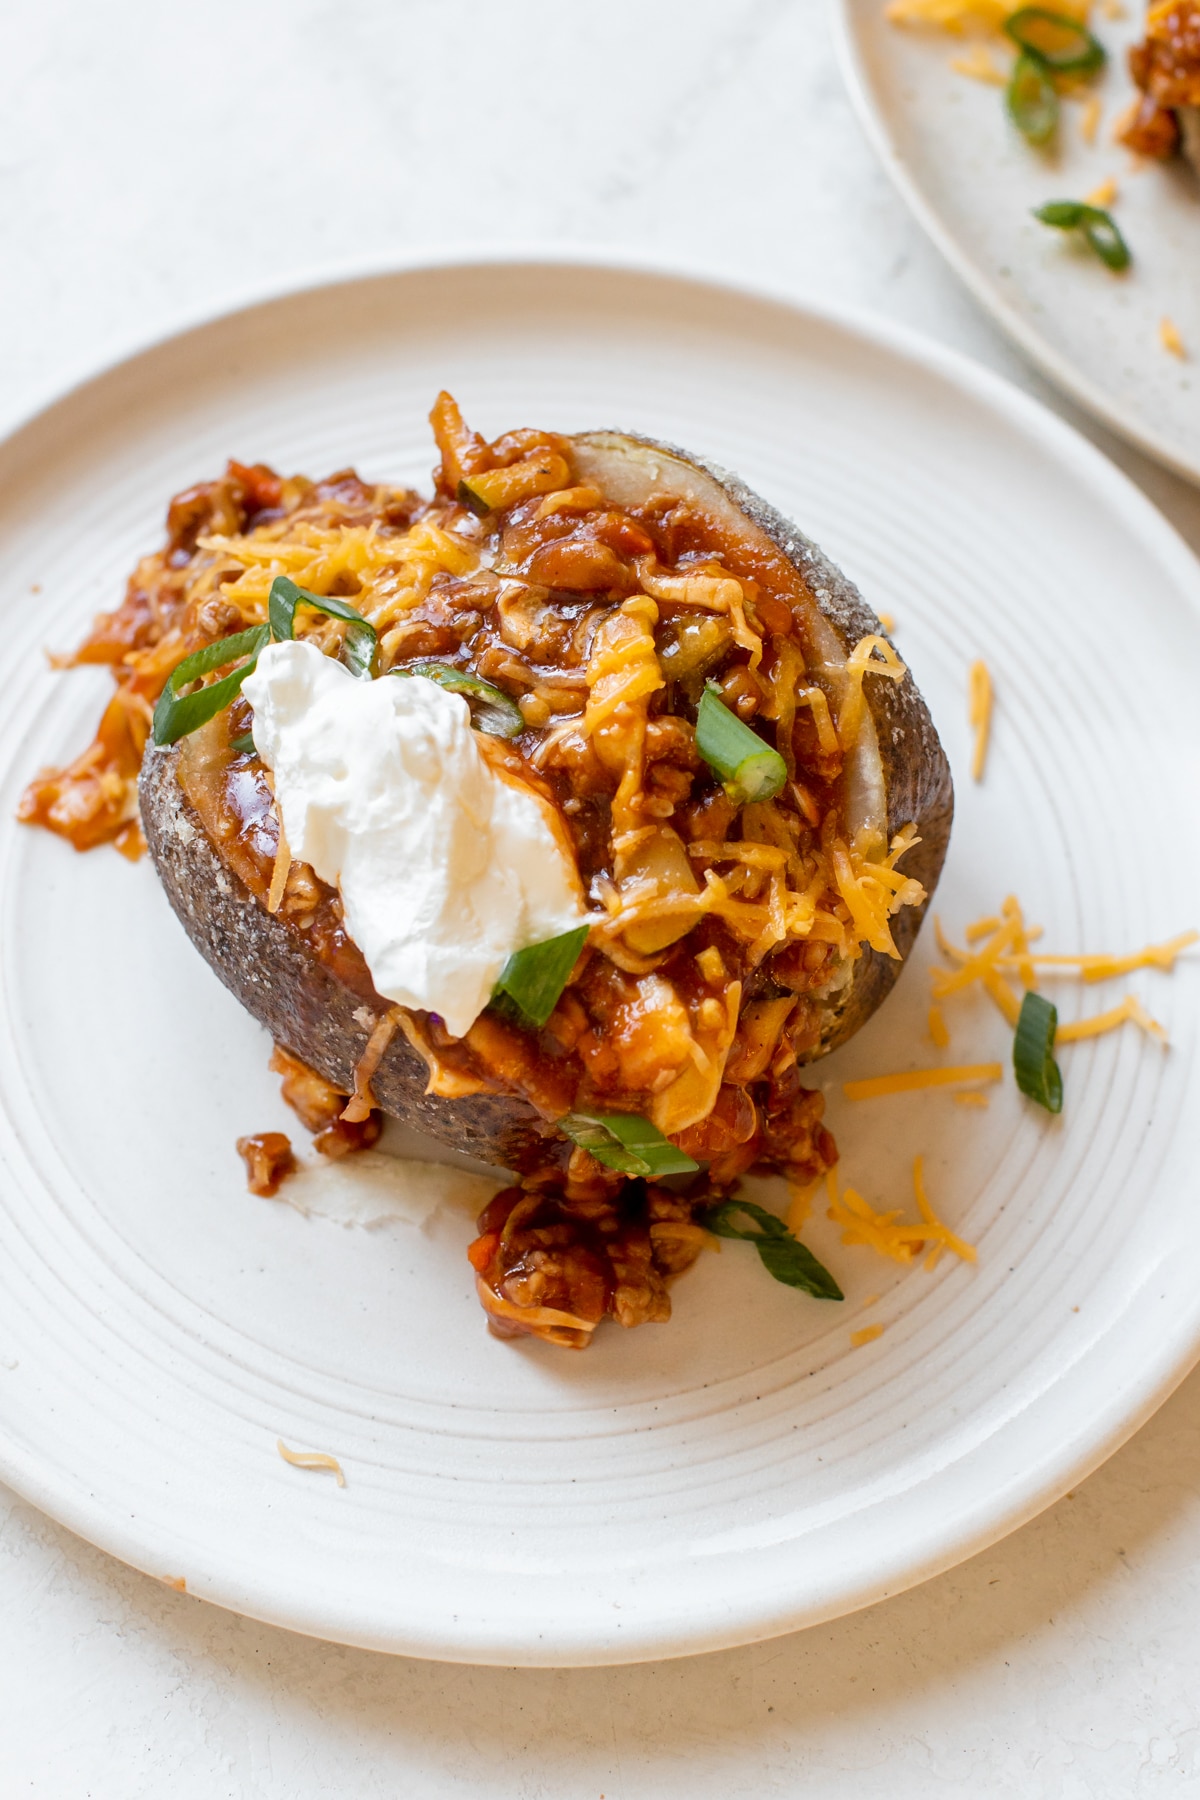 a baked potato stuffed with a ground turkey meat sauce and topped with cheese, green onions and sour cream